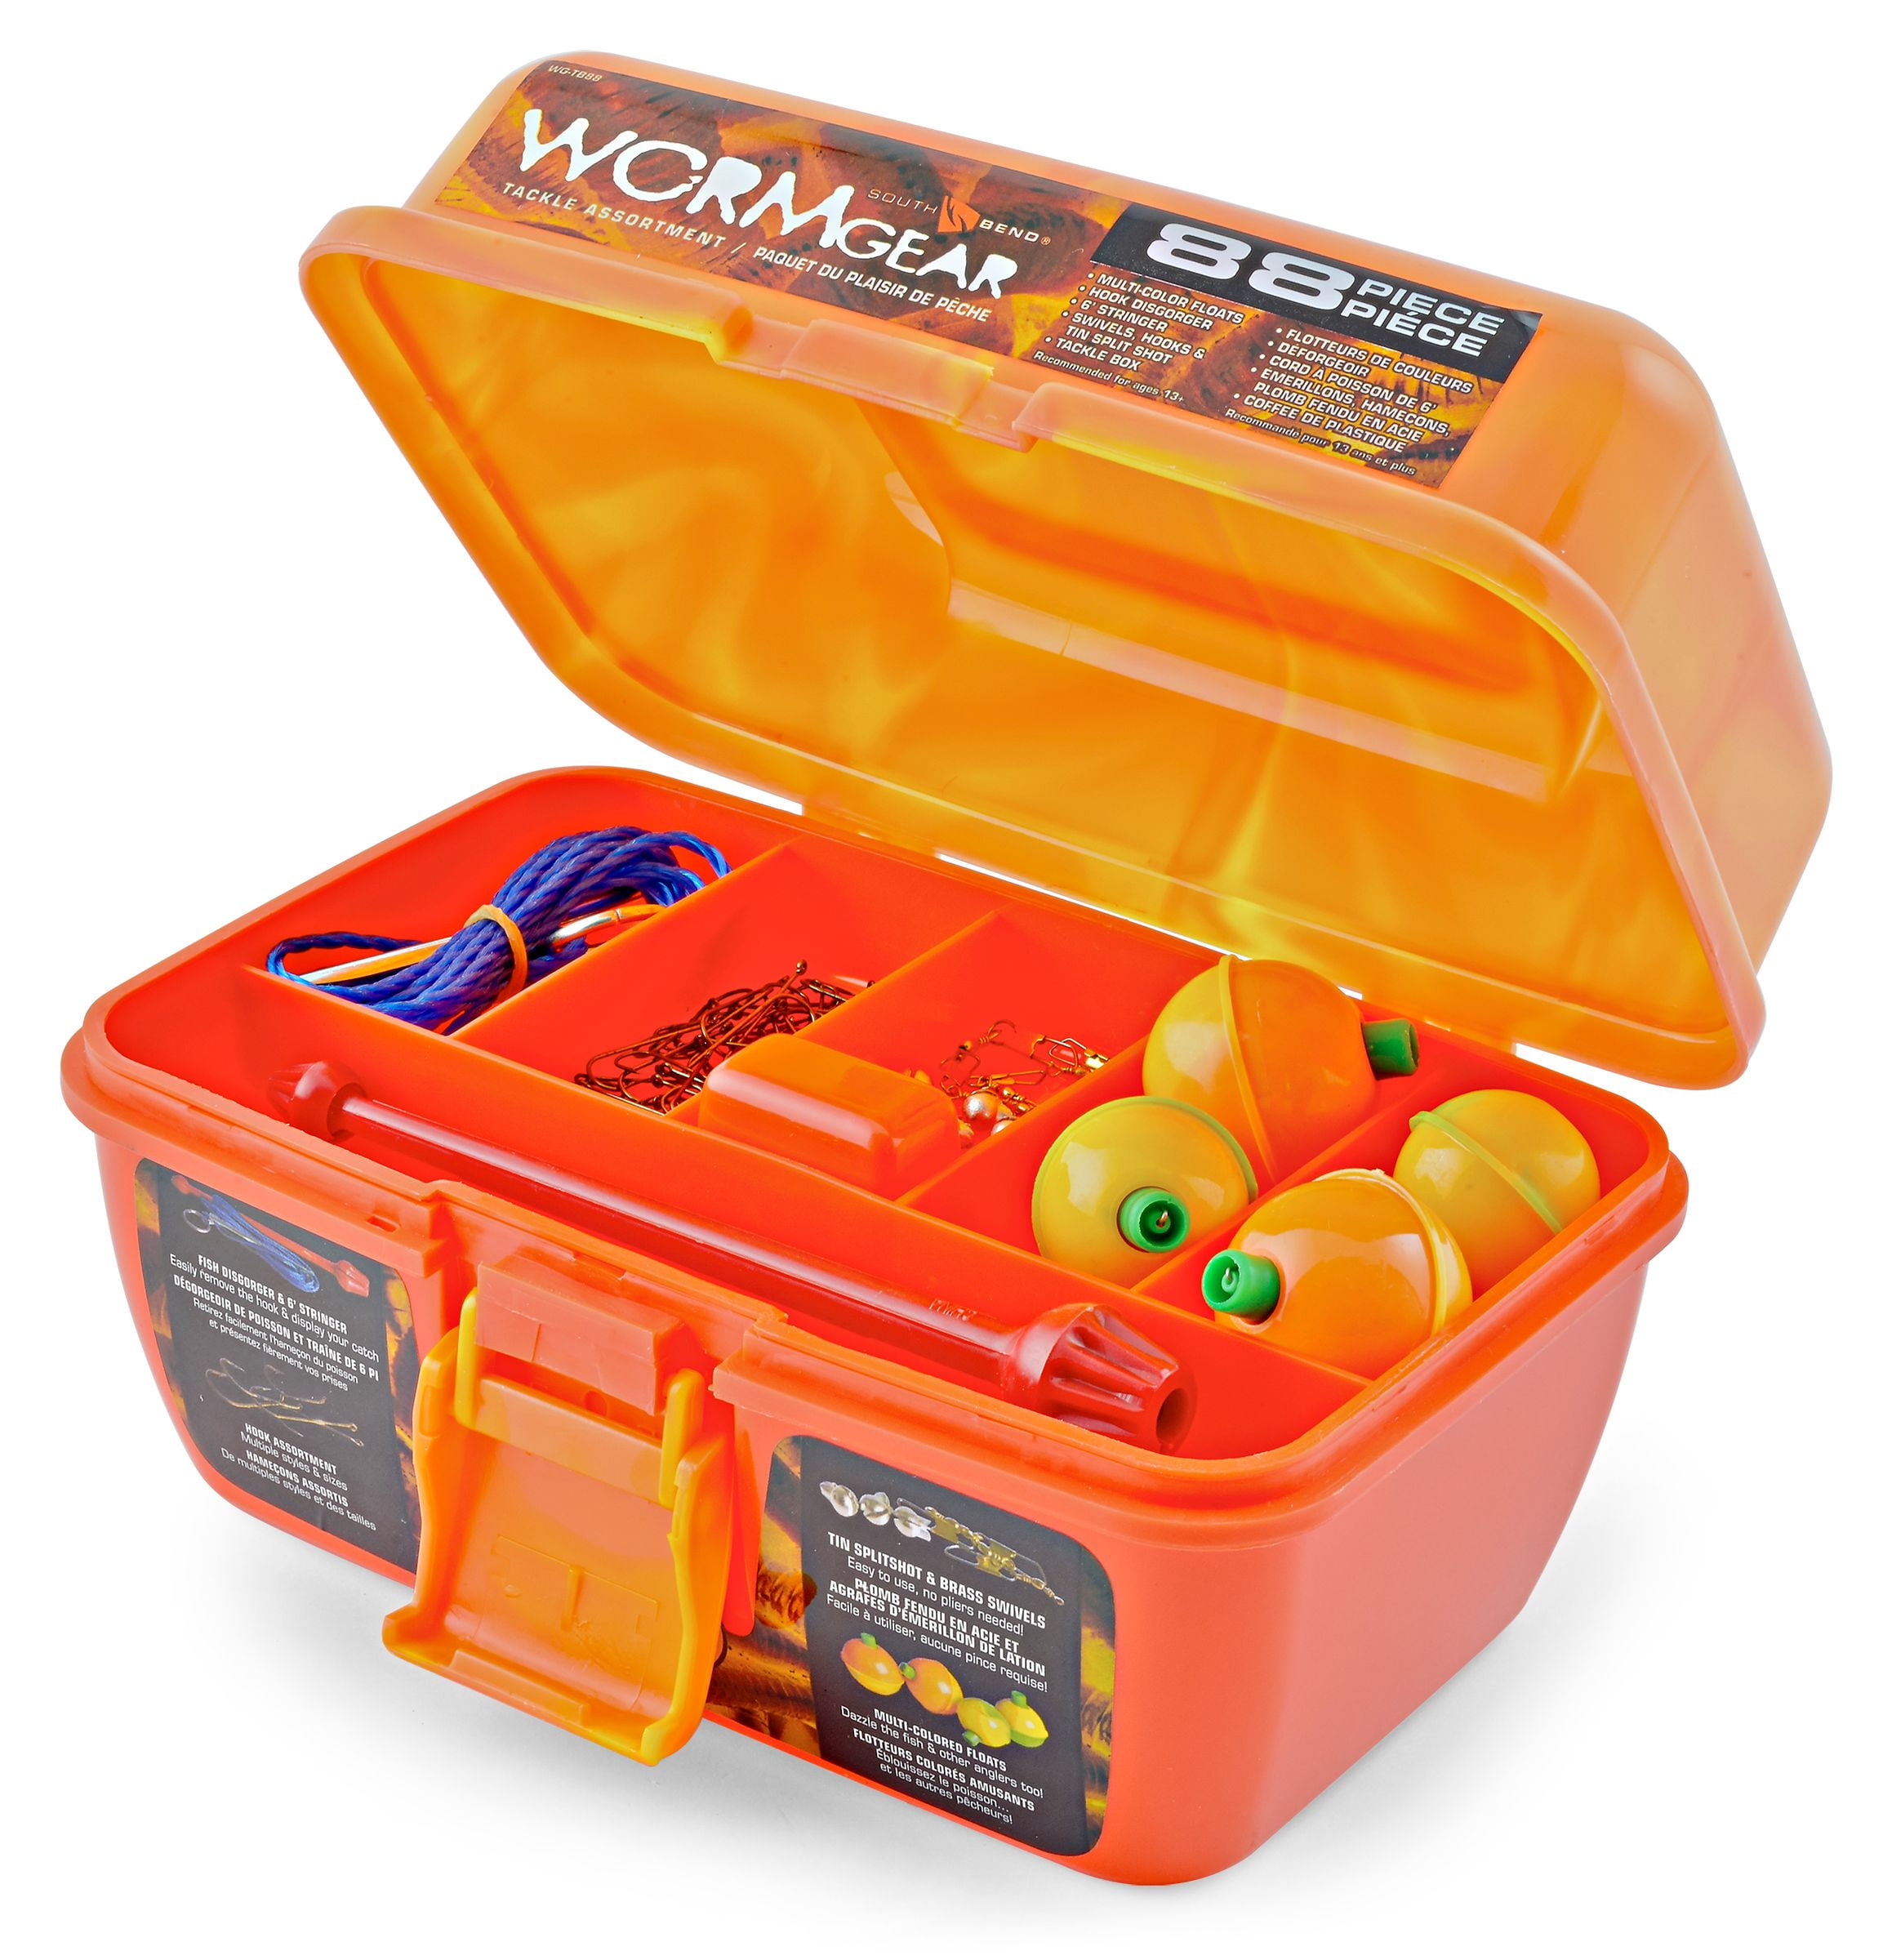 South Bend Worm Gear Tackle Box 88 Piece